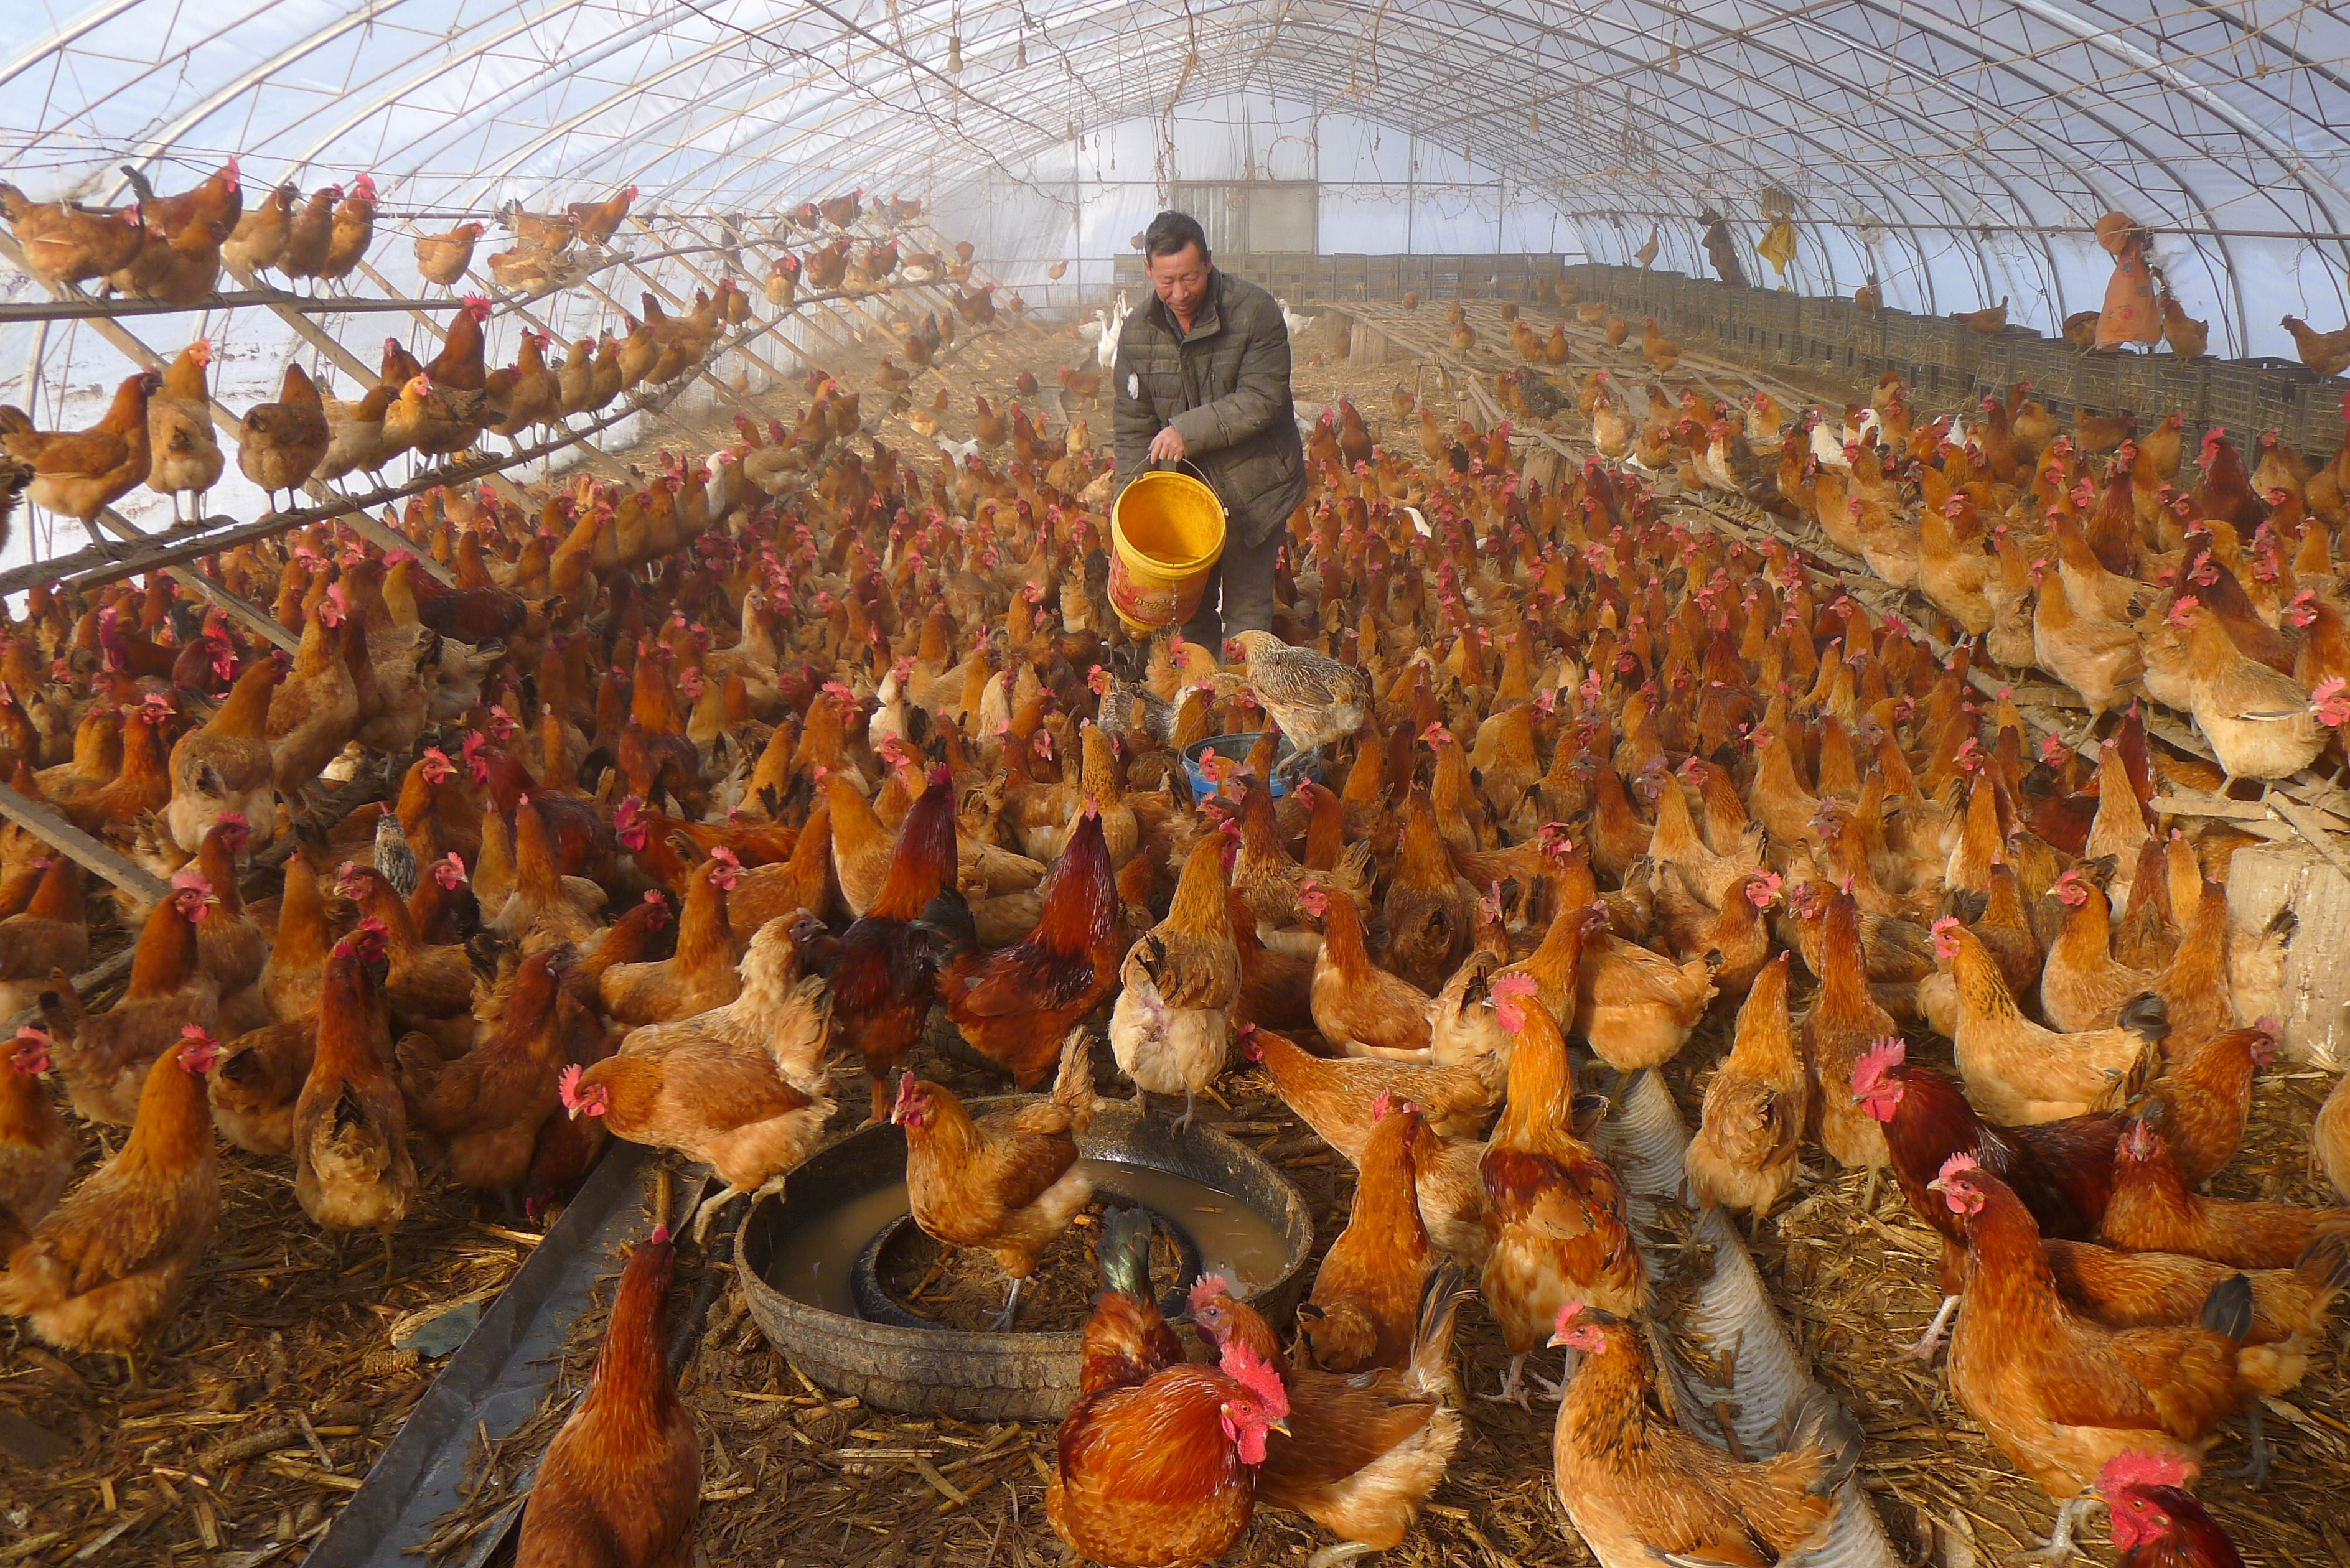  A man provides water for chickens inside a greenhouse at a farm in Heihe, Heilongjiang province, China November 17, 2019.   REUTERS/Stringer   